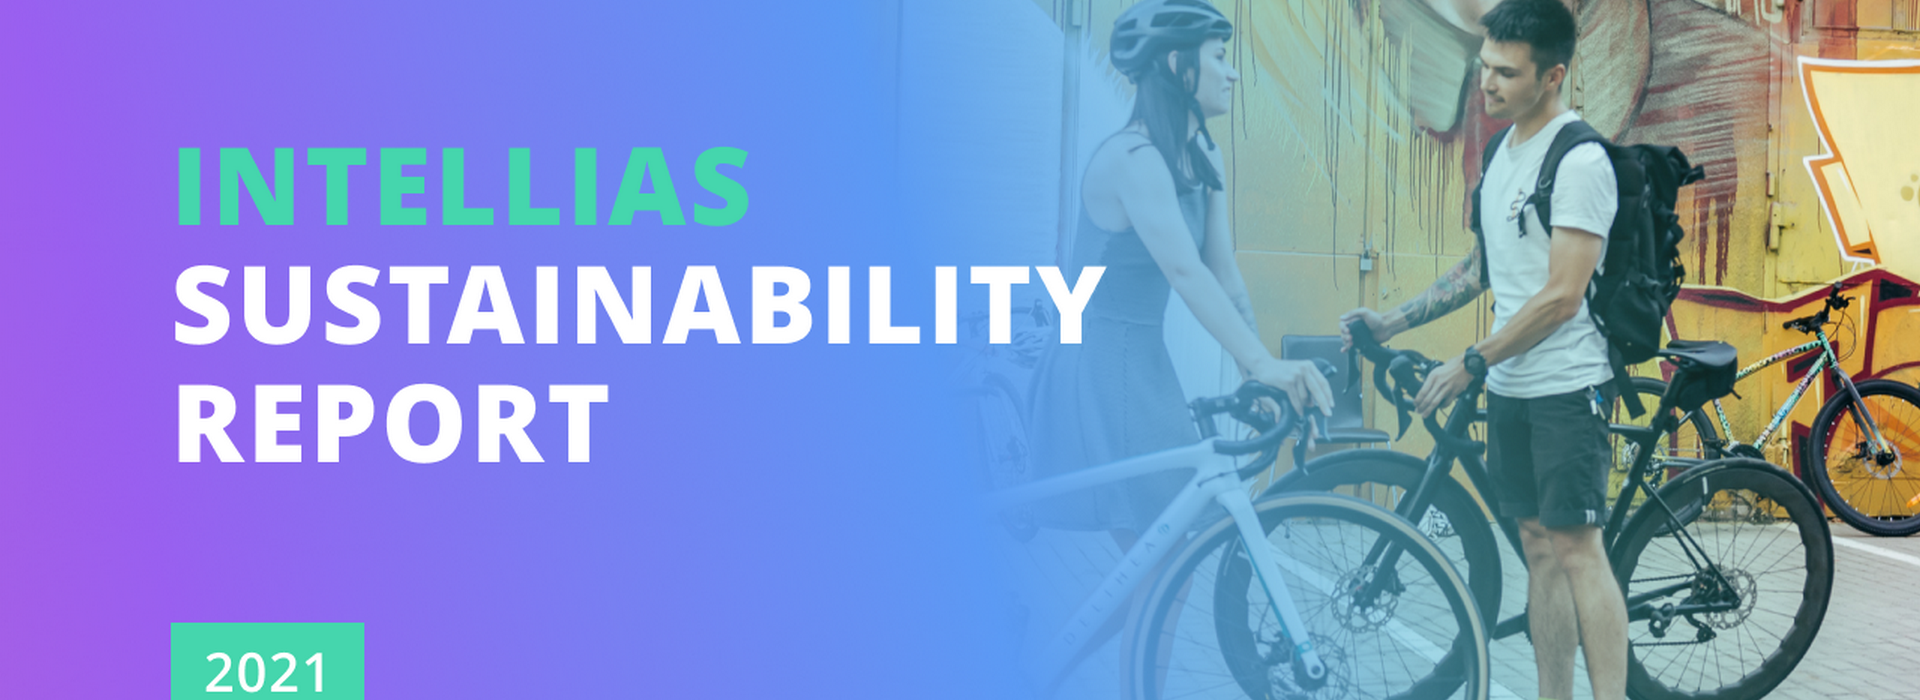 Intellias Presented the 2021 Sustainability Report